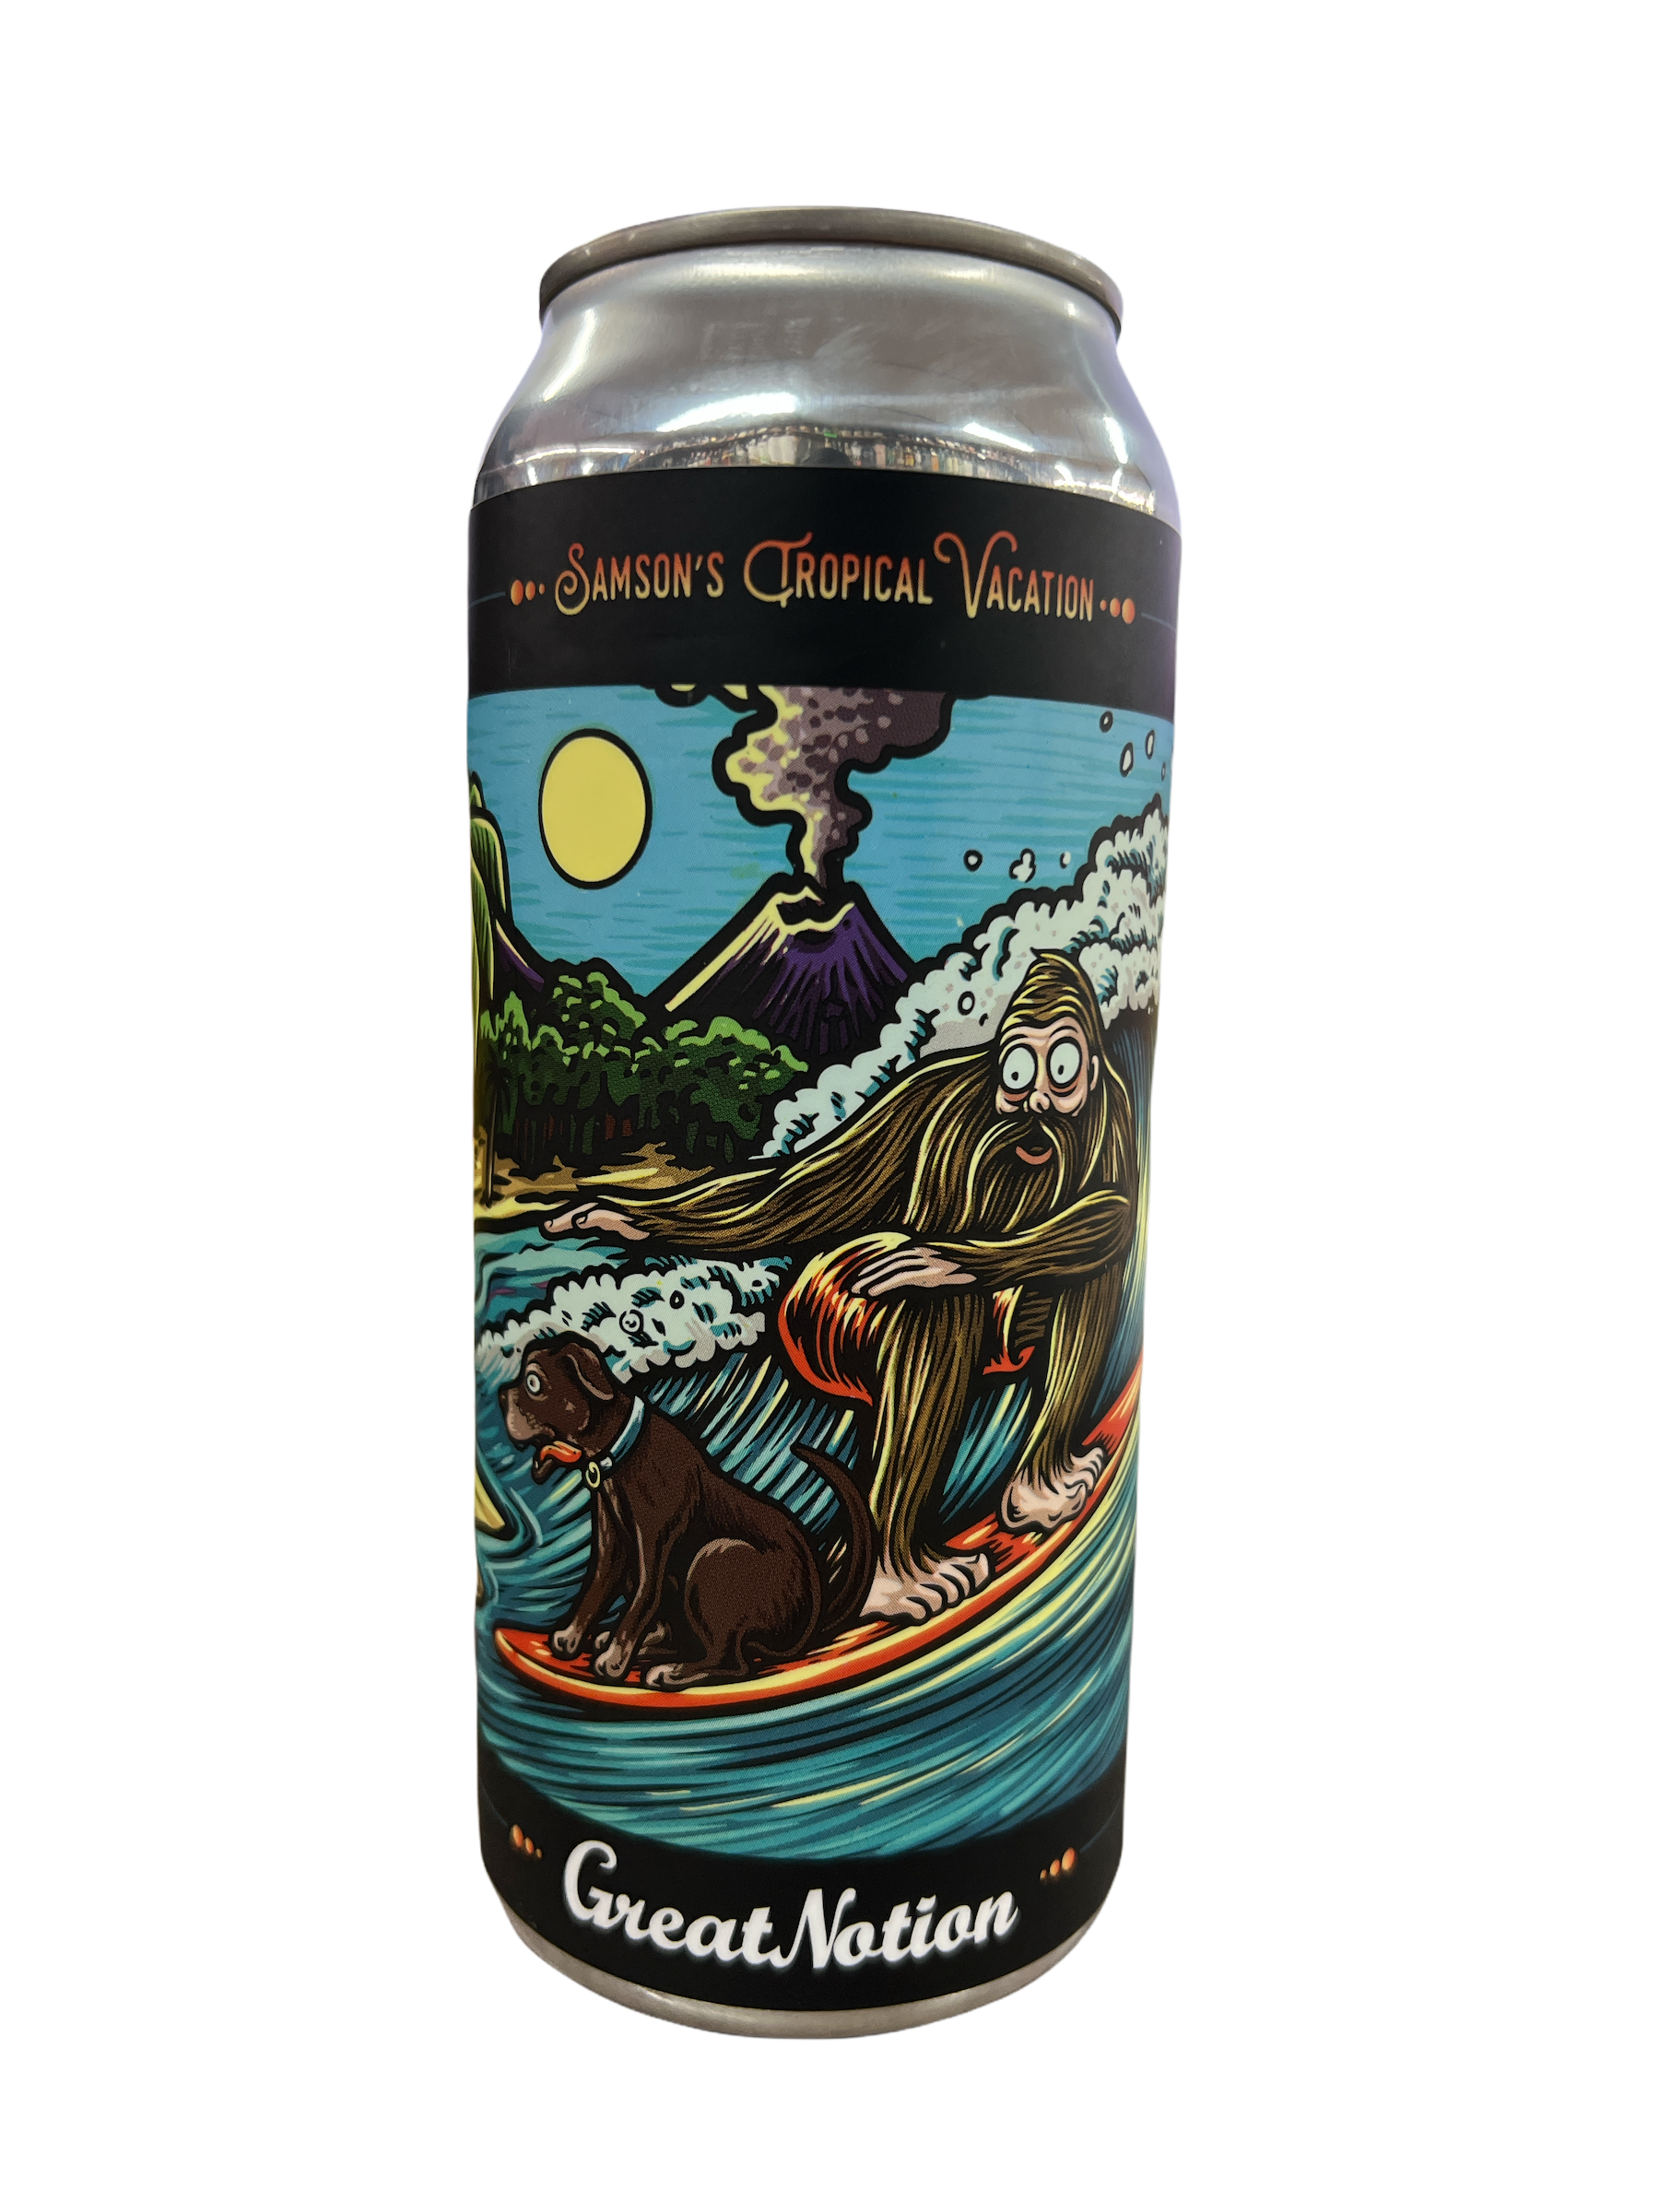 Buy Great Notion Samson's Tropical Vacation Online -Craft City